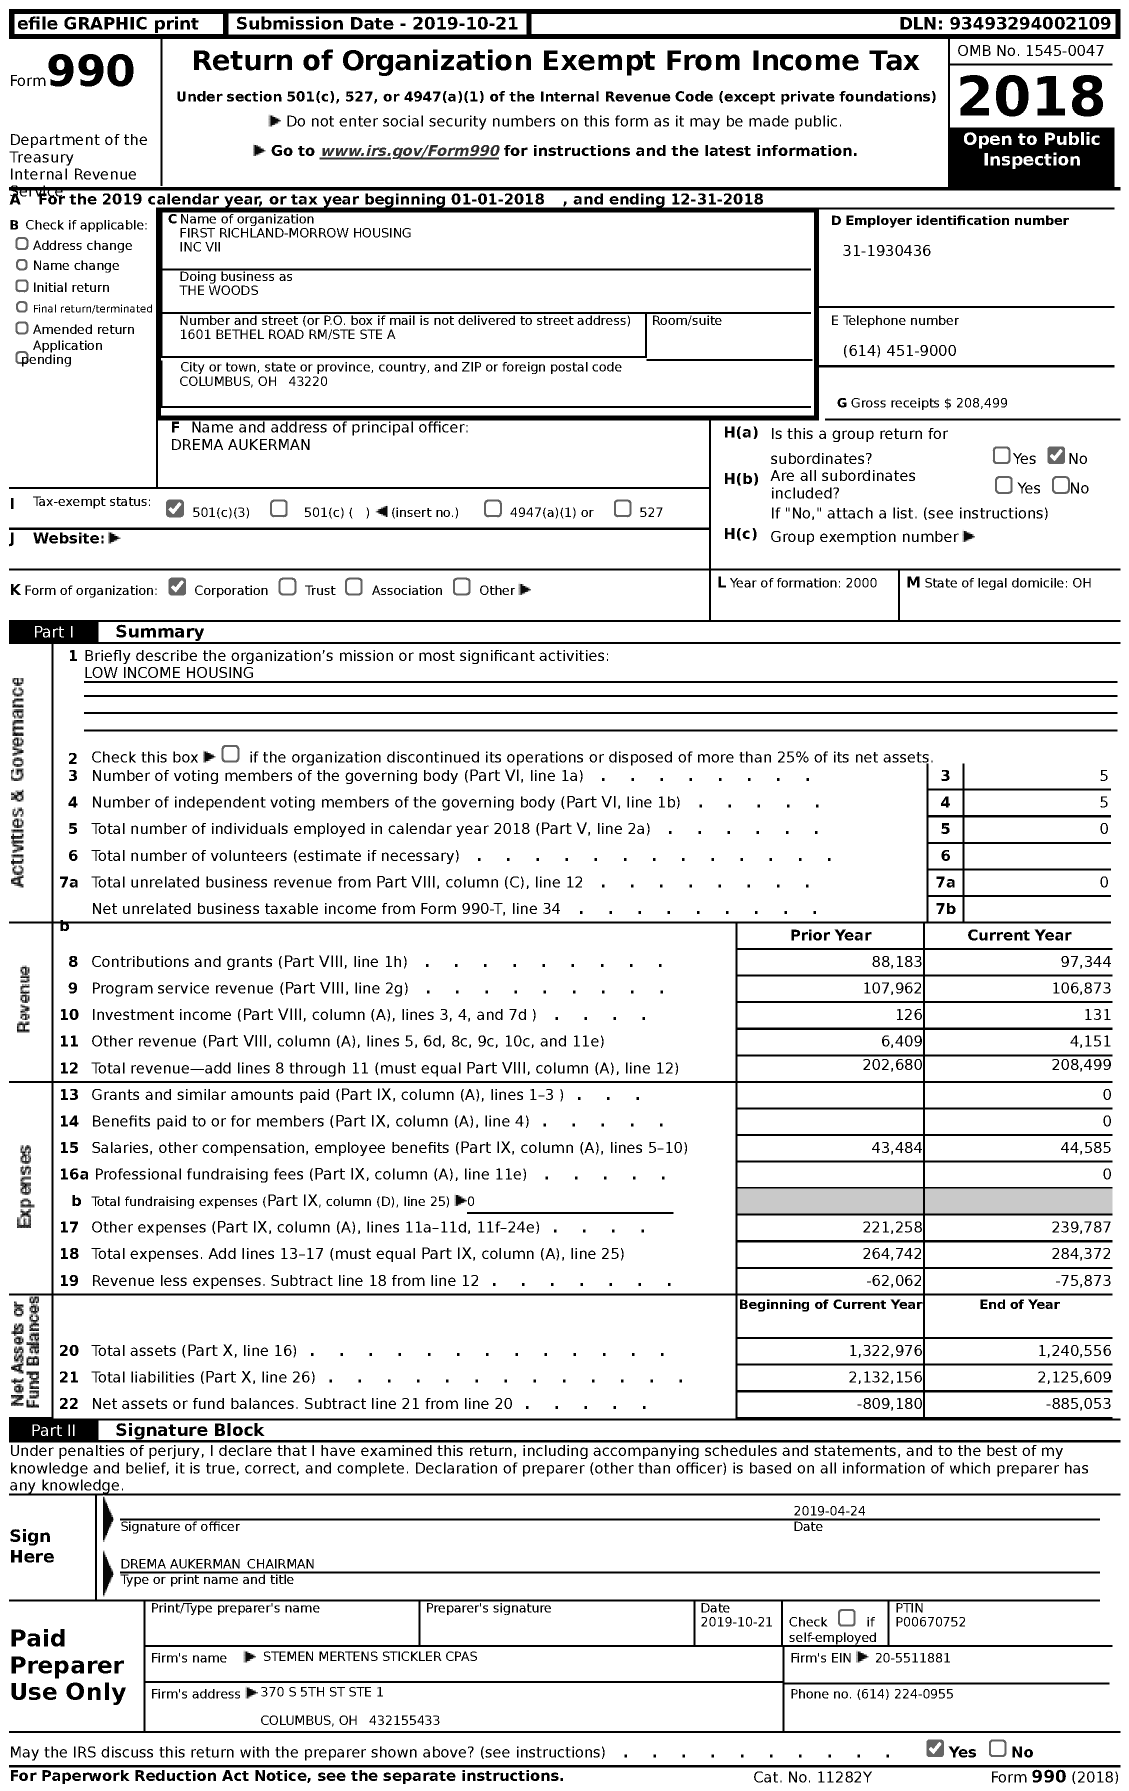 Image of first page of 2018 Form 990 for The Woods / First Richland-Morrow Housing Inc Vii